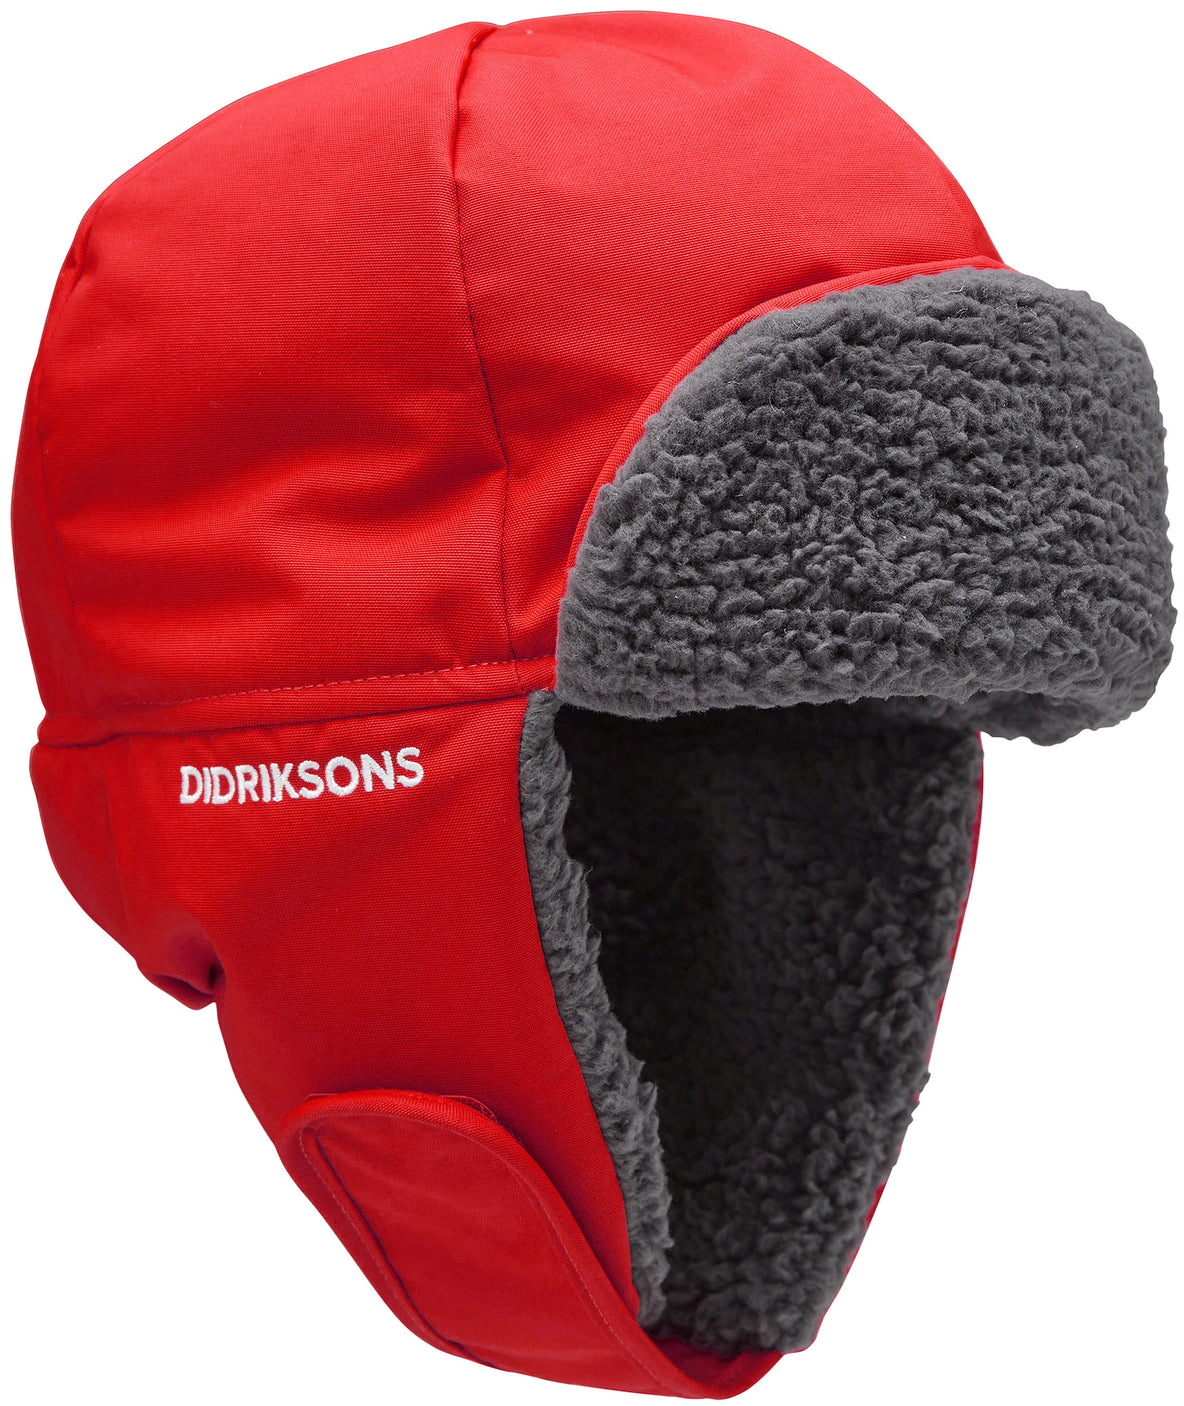 Didriksons Biggles Cap in Chilli Red 